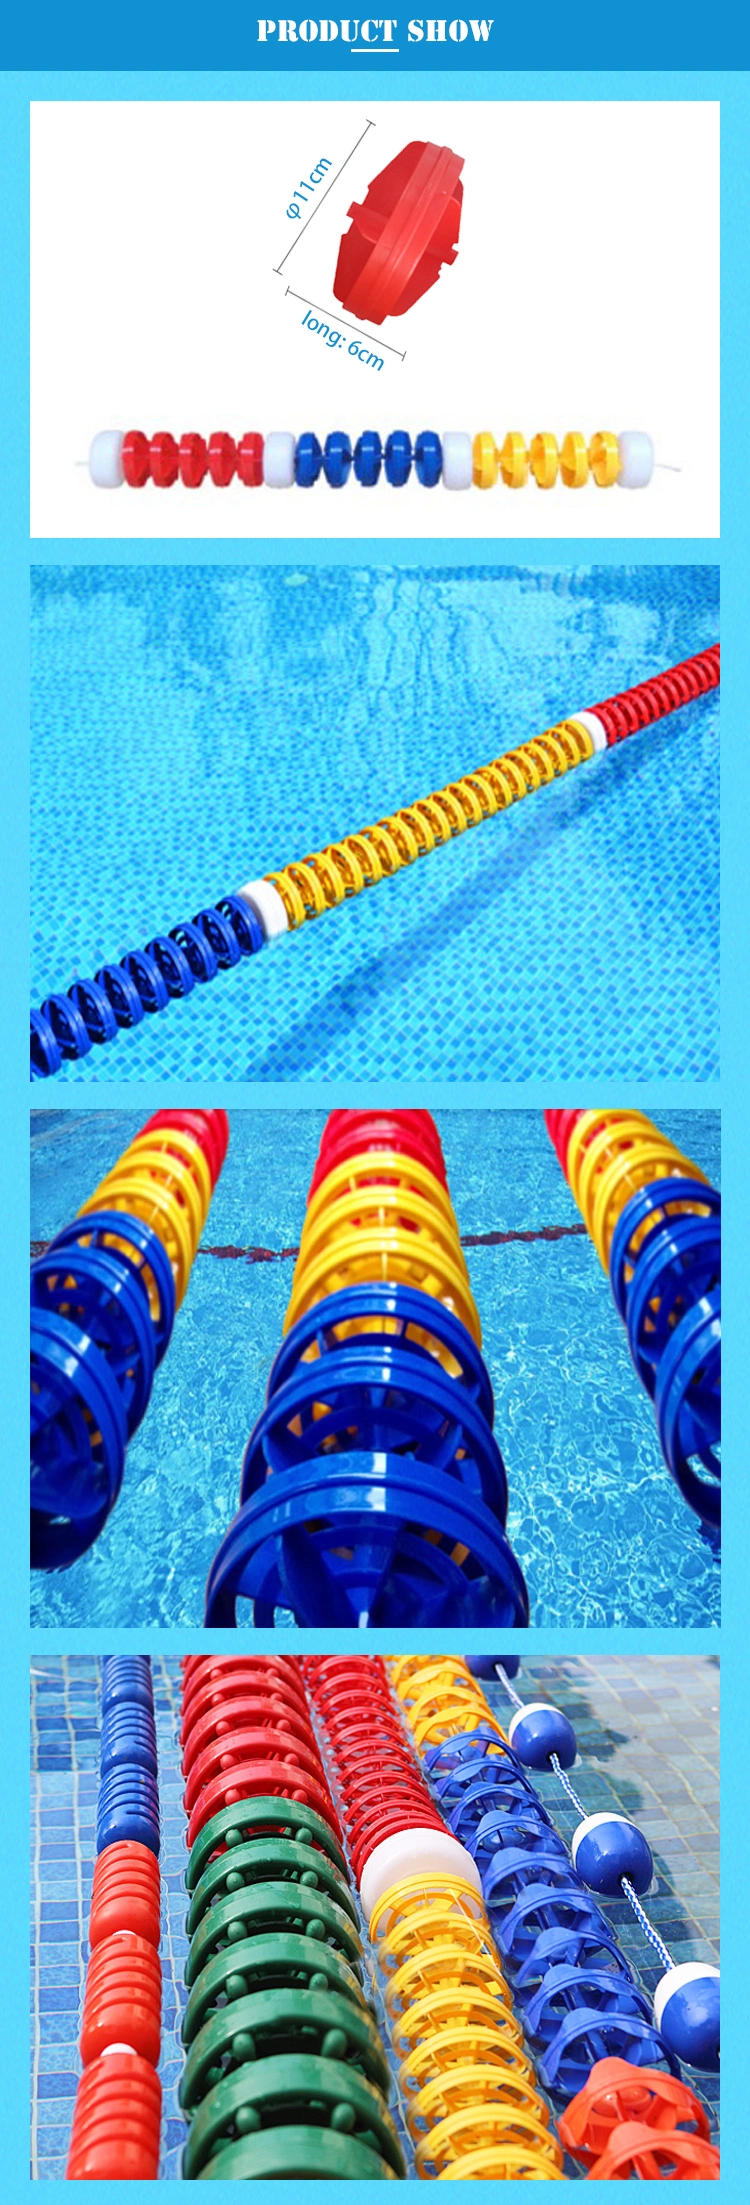 Swimming Pool Accessories Scratch Proof Floating Racing Lane